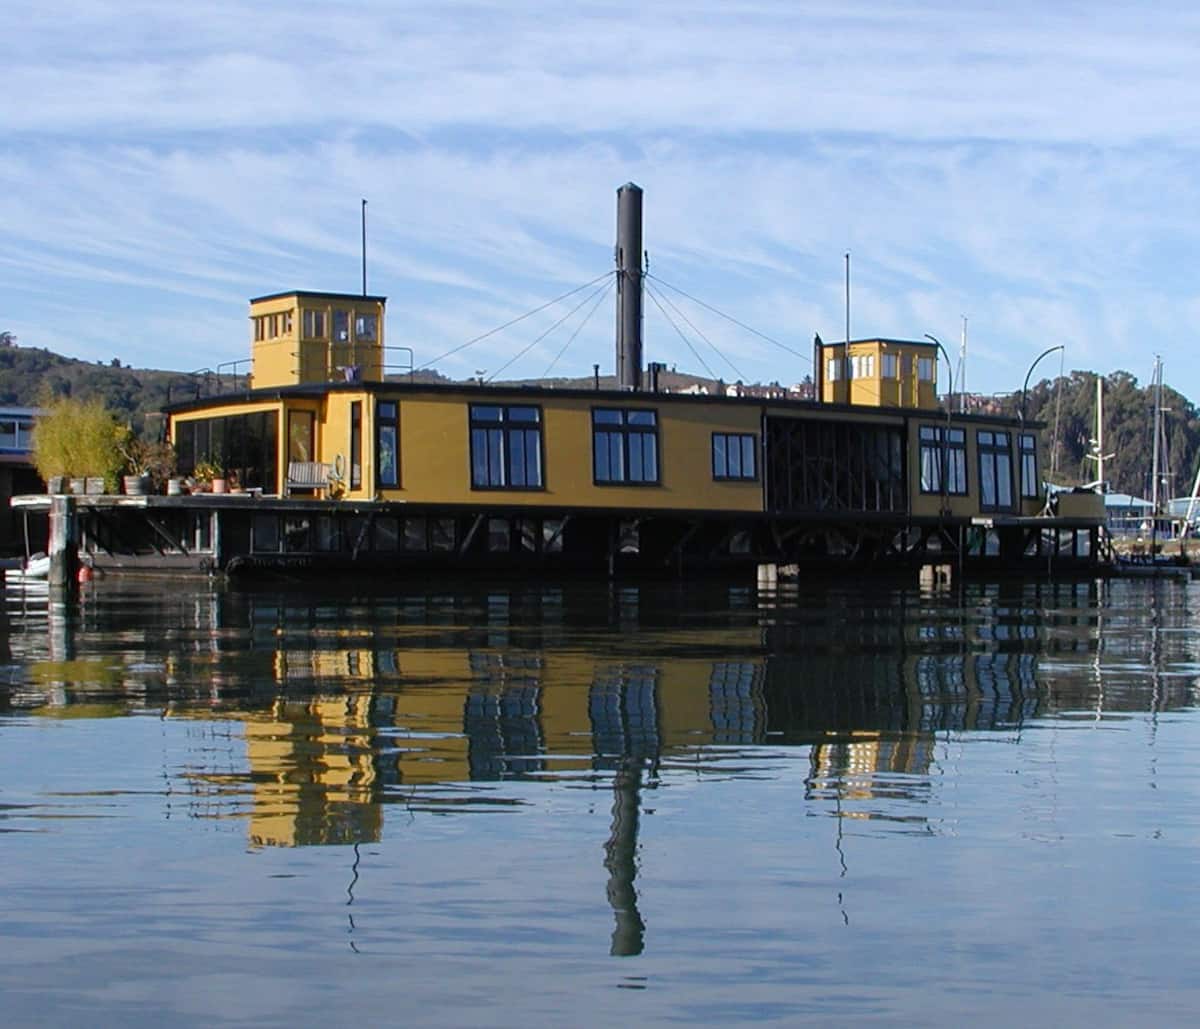 A historic yellow ferryboat sits in the harbor in Sausalito, California